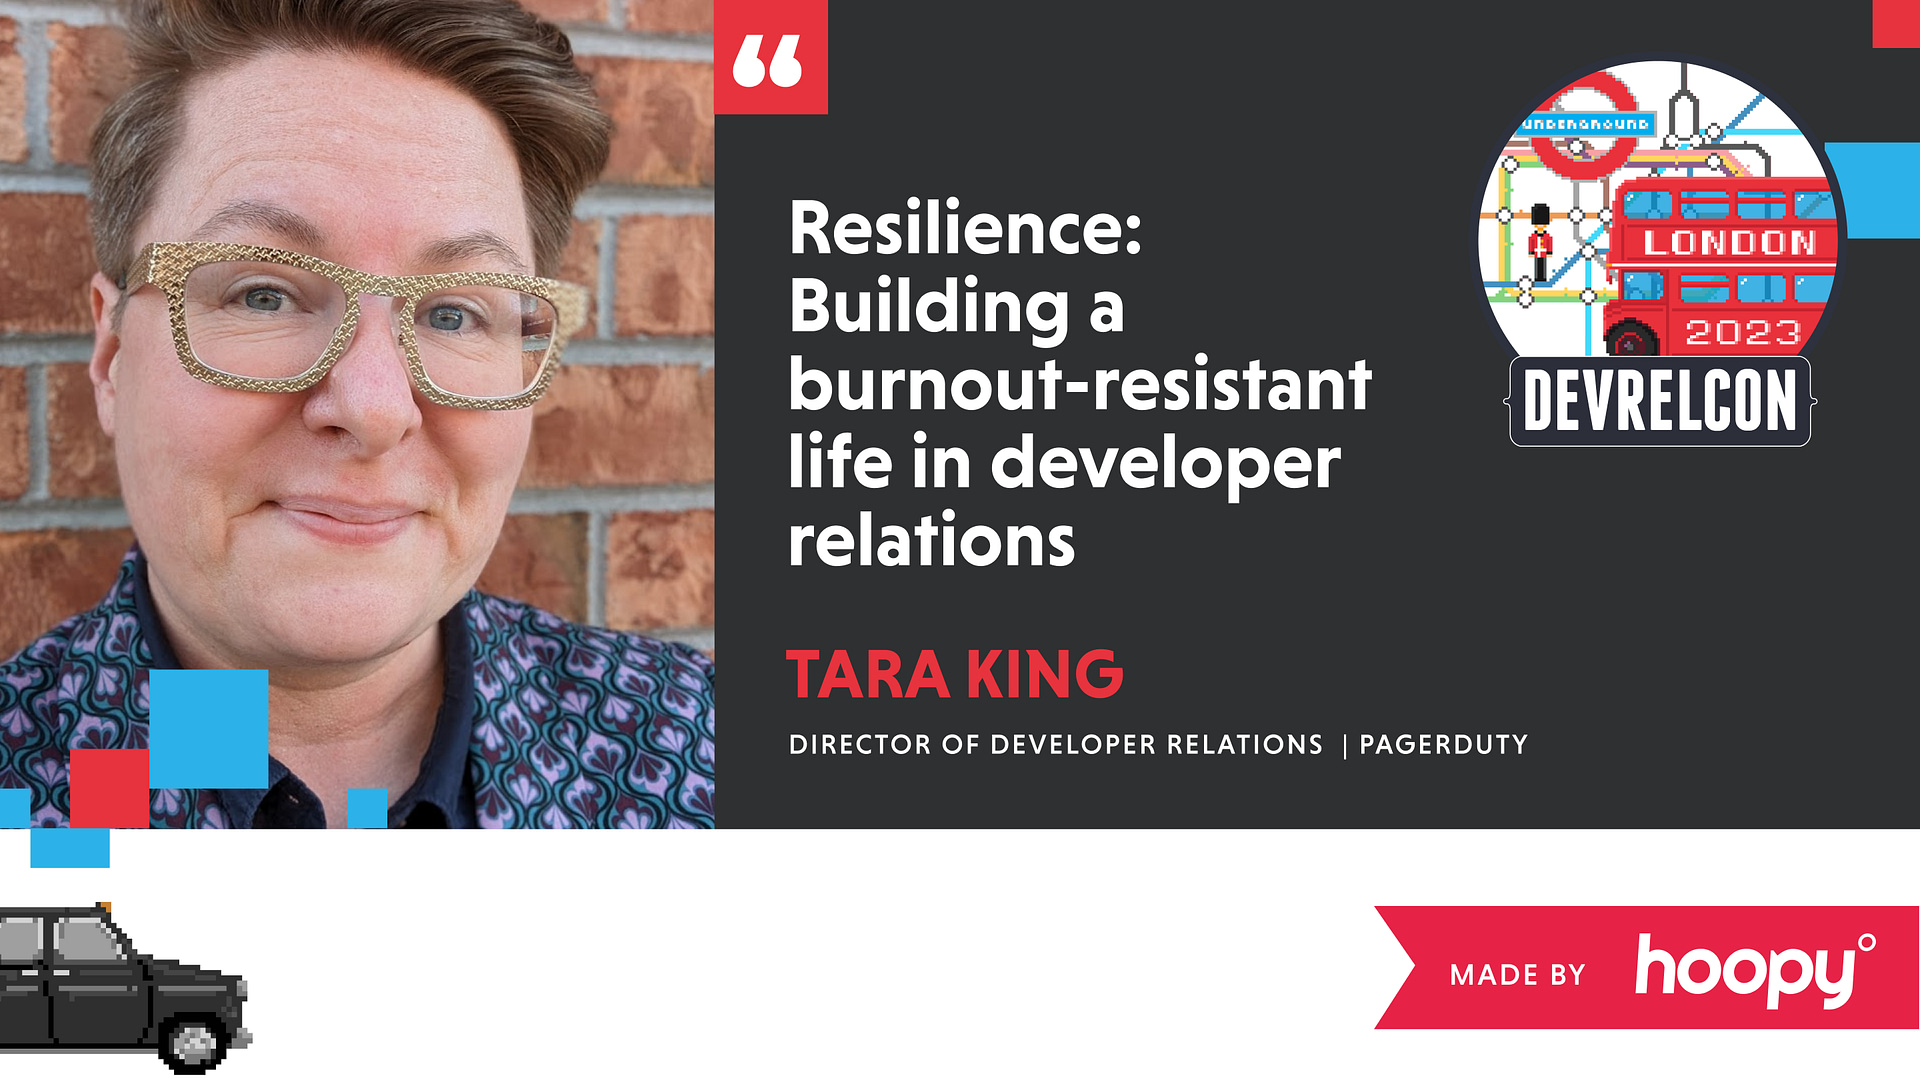 "Portrait of Tara King with short brown hair, wearing golden-framed glasses and a patterned shirt. The text reads: 'Resilience: Building a burnout-resistant life in developer relations' presented by Tara King, Director of Developer Relations at PagerDuty. This is a promotional graphic for DEVRELCON London 2023. The background includes an illustrated London Underground map, a red double-decker bus, and the date '2023'. The bottom right corner has a red banner with the text 'Made by Hoopy'."